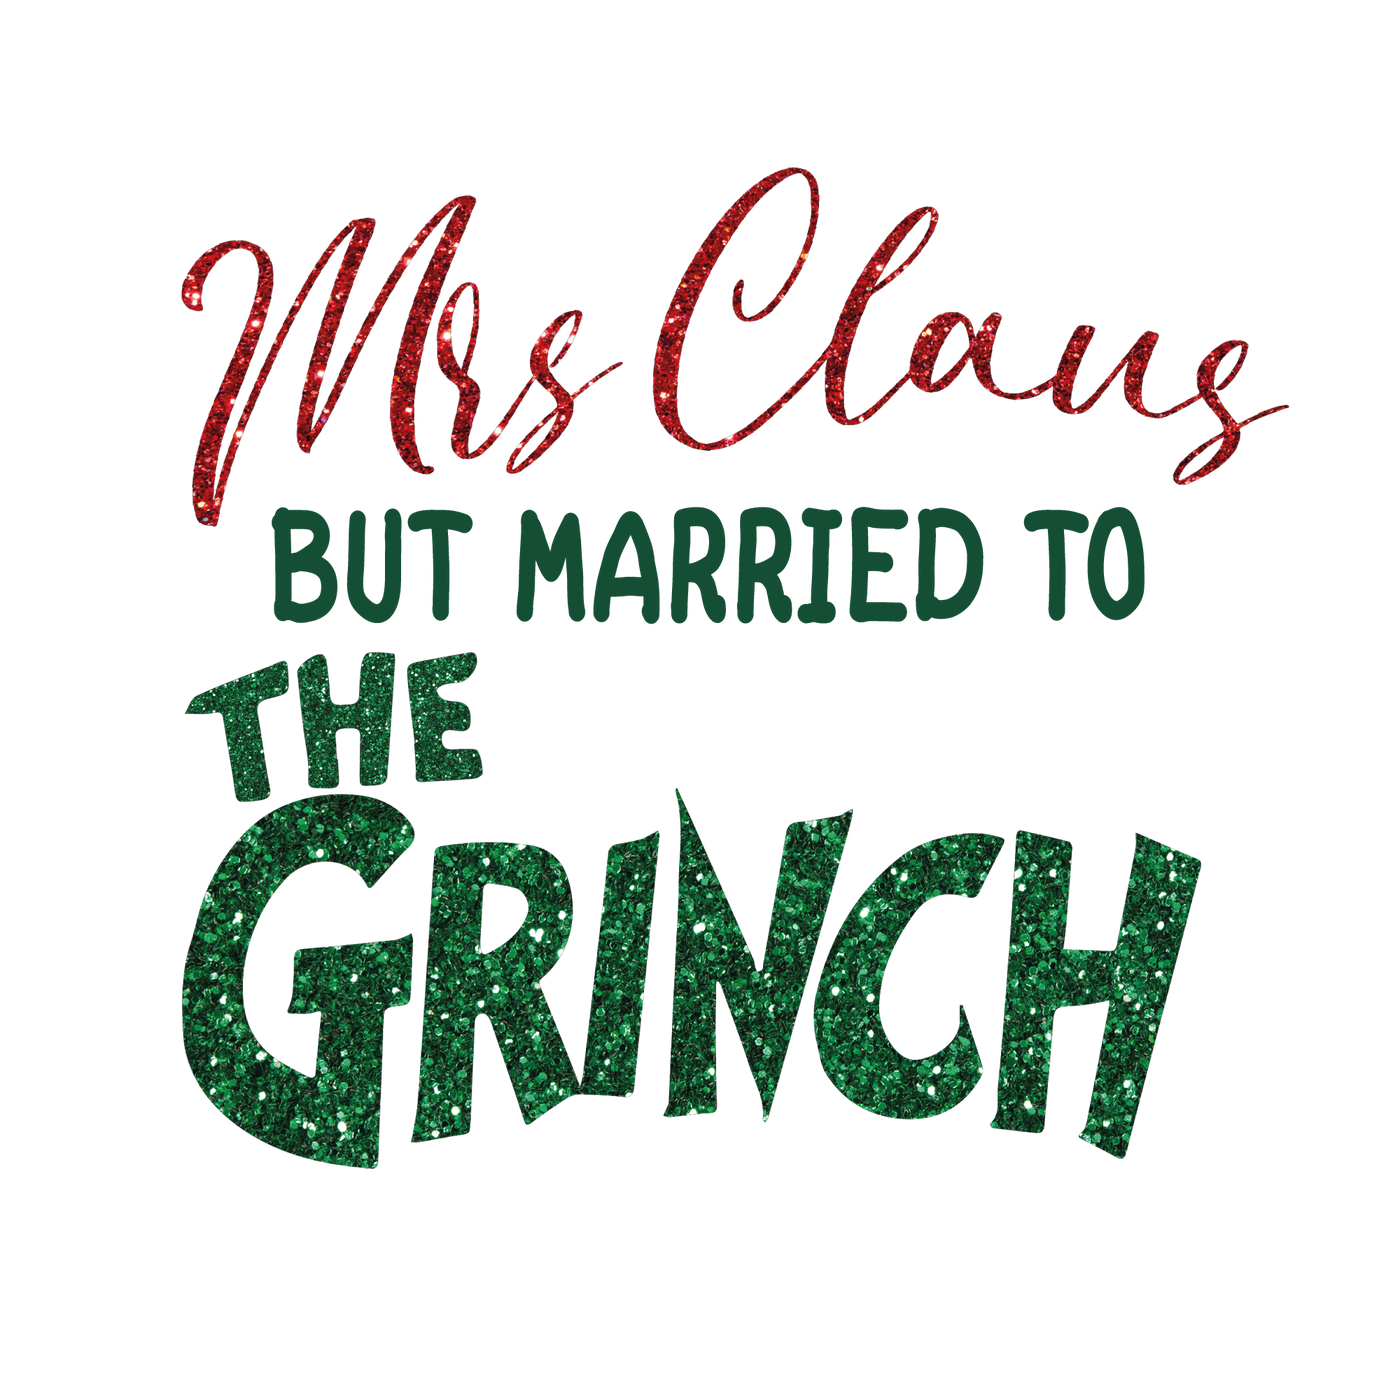 MARRIED TO THE GRINCH